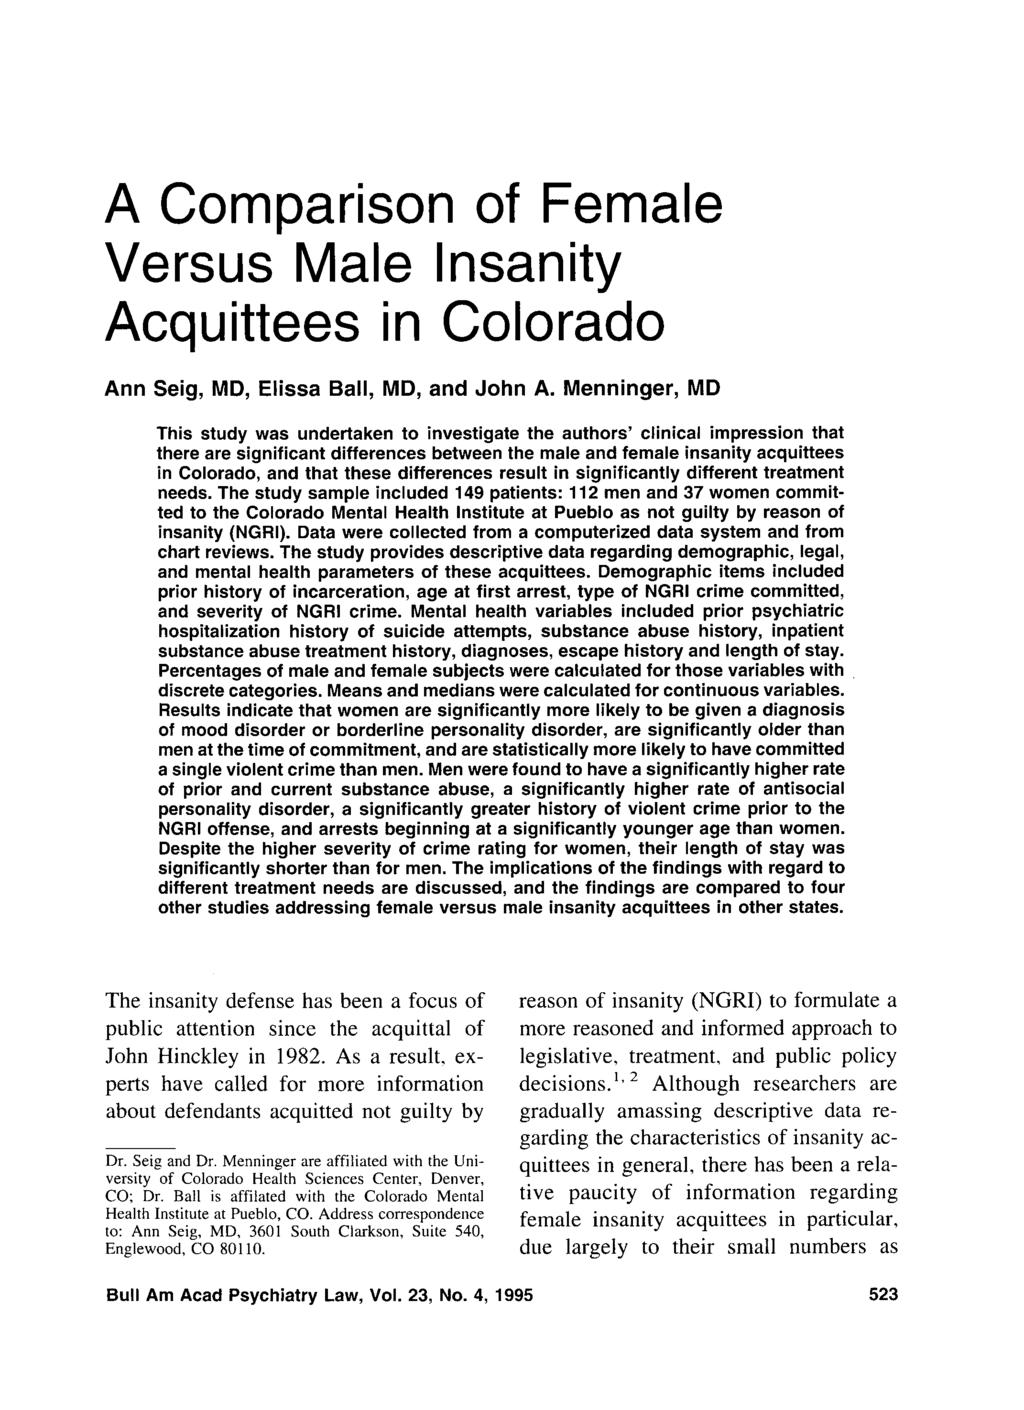 A Comparison of Female Versus Male Insanity Acquittees in Colorado Ann Seig, MD, Elissa Ball, MD, and John A.